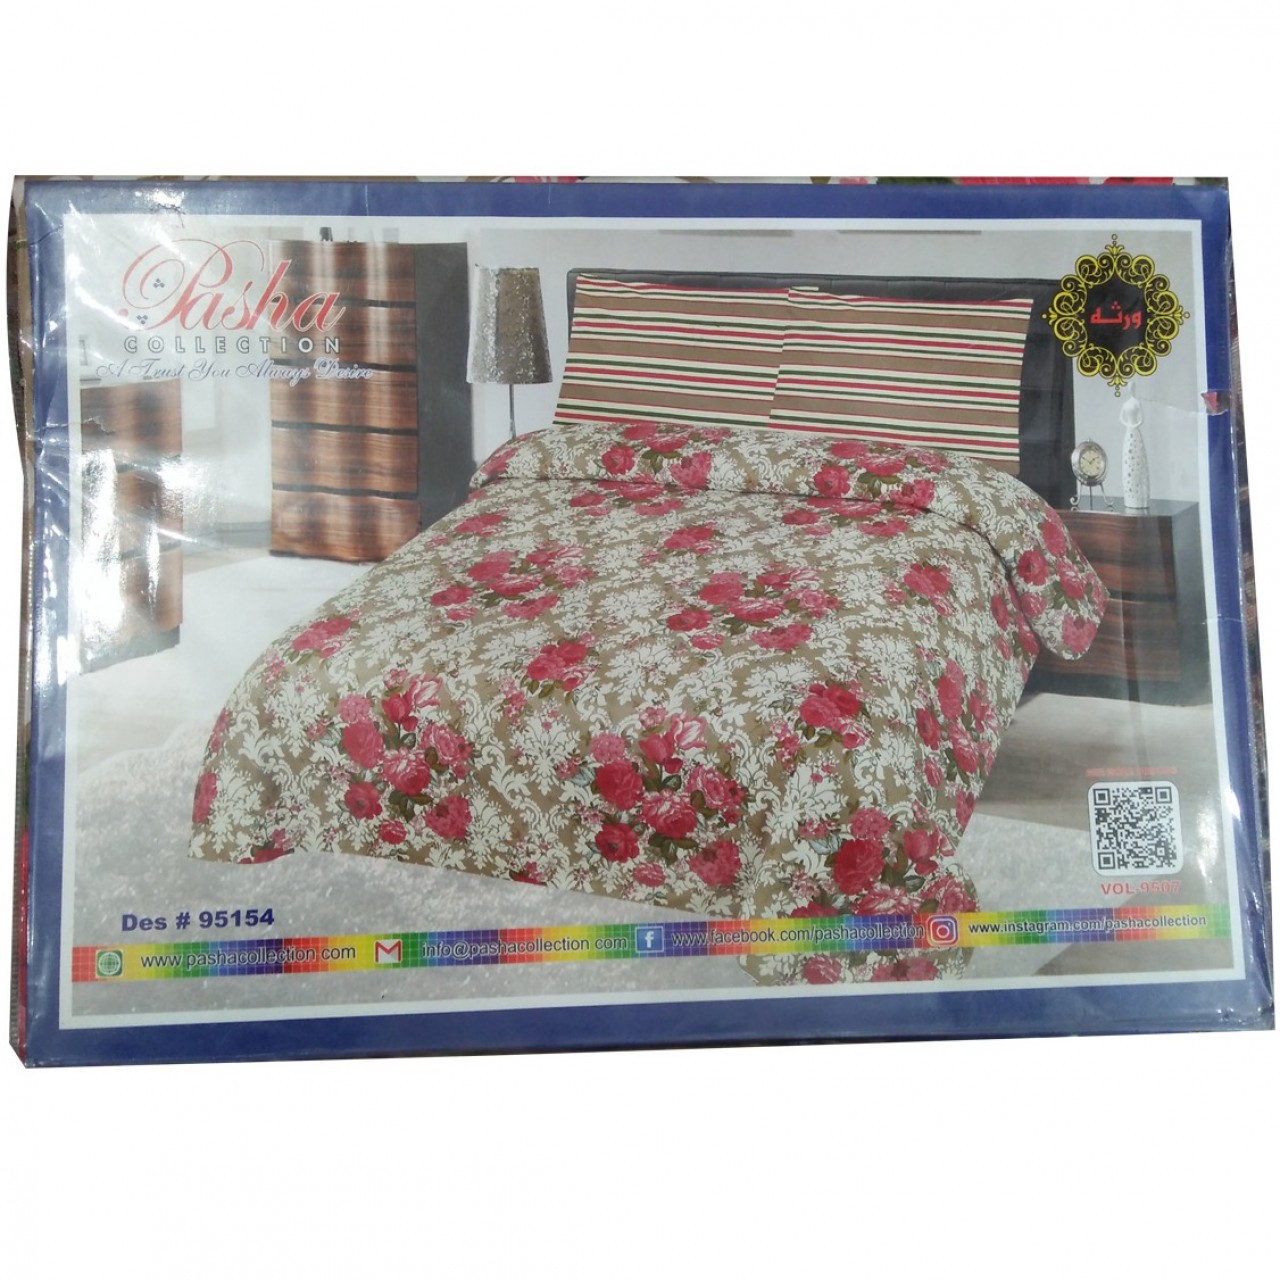 Pasha Collection Double Virsa Bed Sheet Des-95154 With 2 Pillow Covers